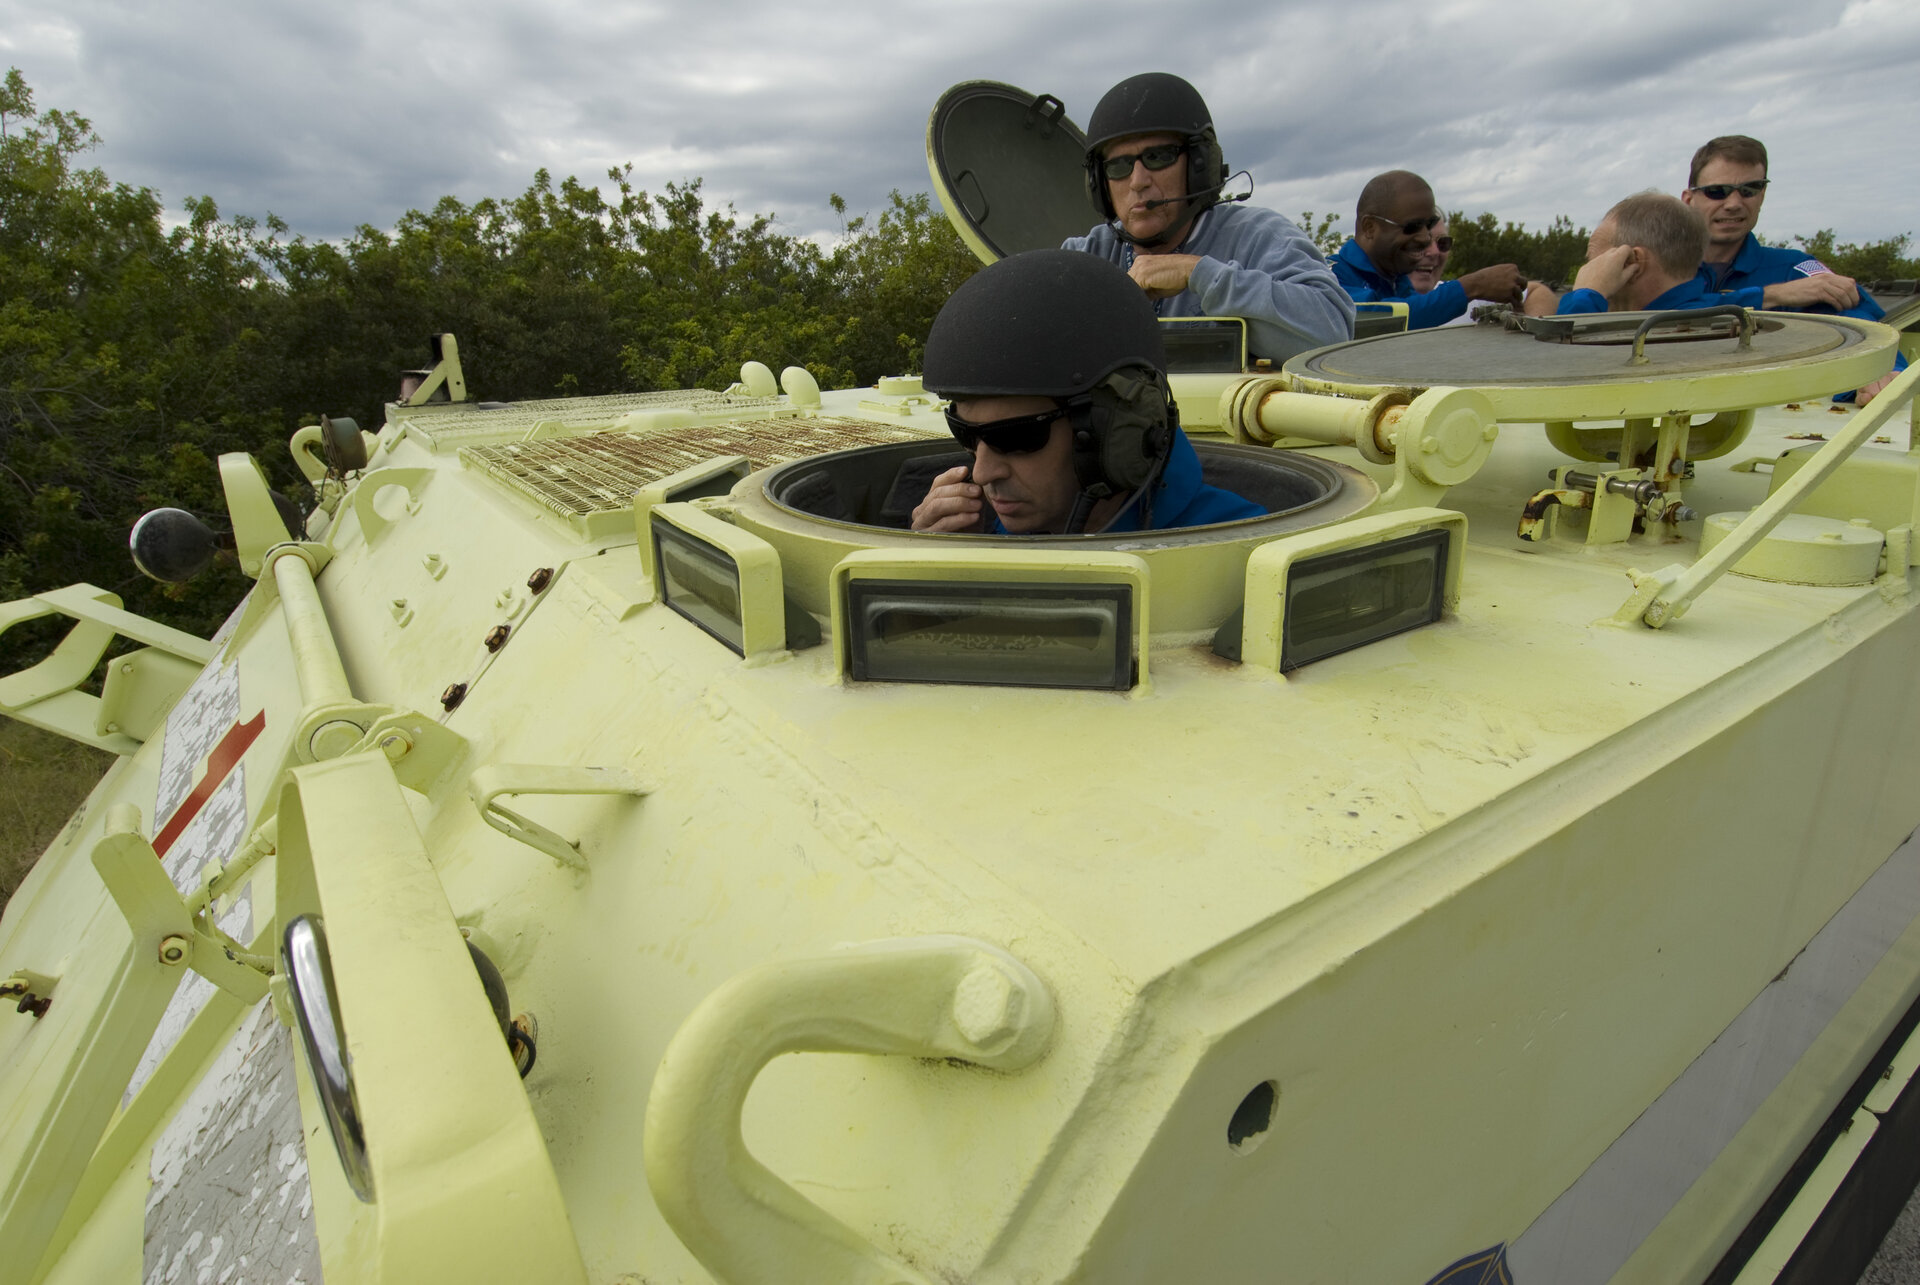 Léopold Eyharts practices driving an emergency evacuation vehicle during training at Kennedy Space Center, Florida